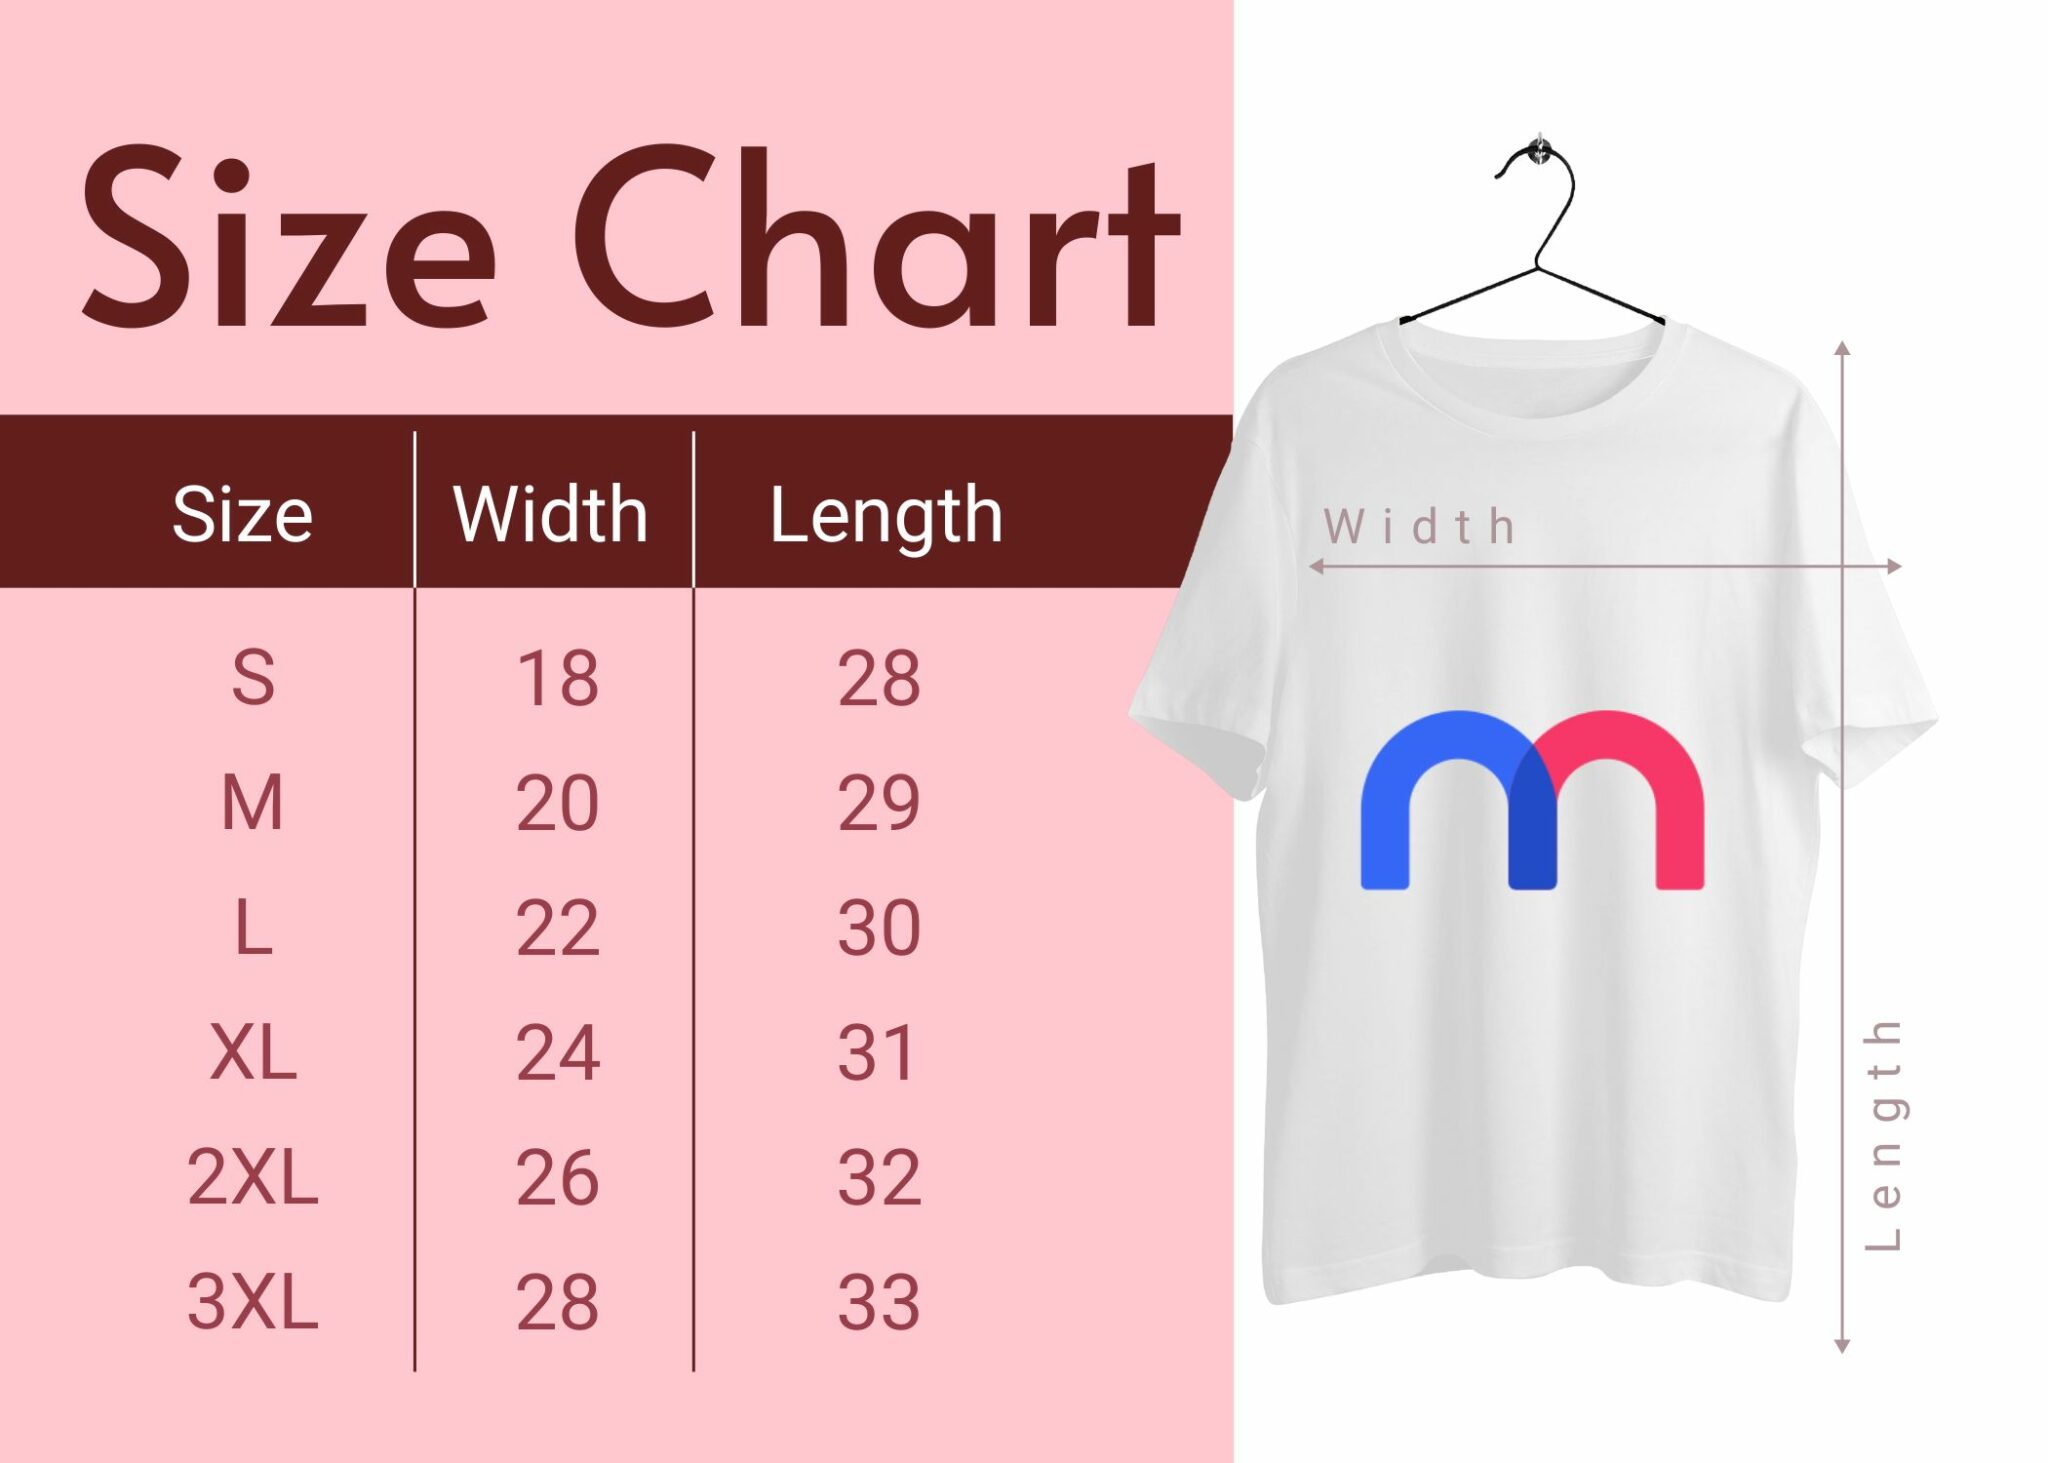 Women's Apparel Sizing Guide